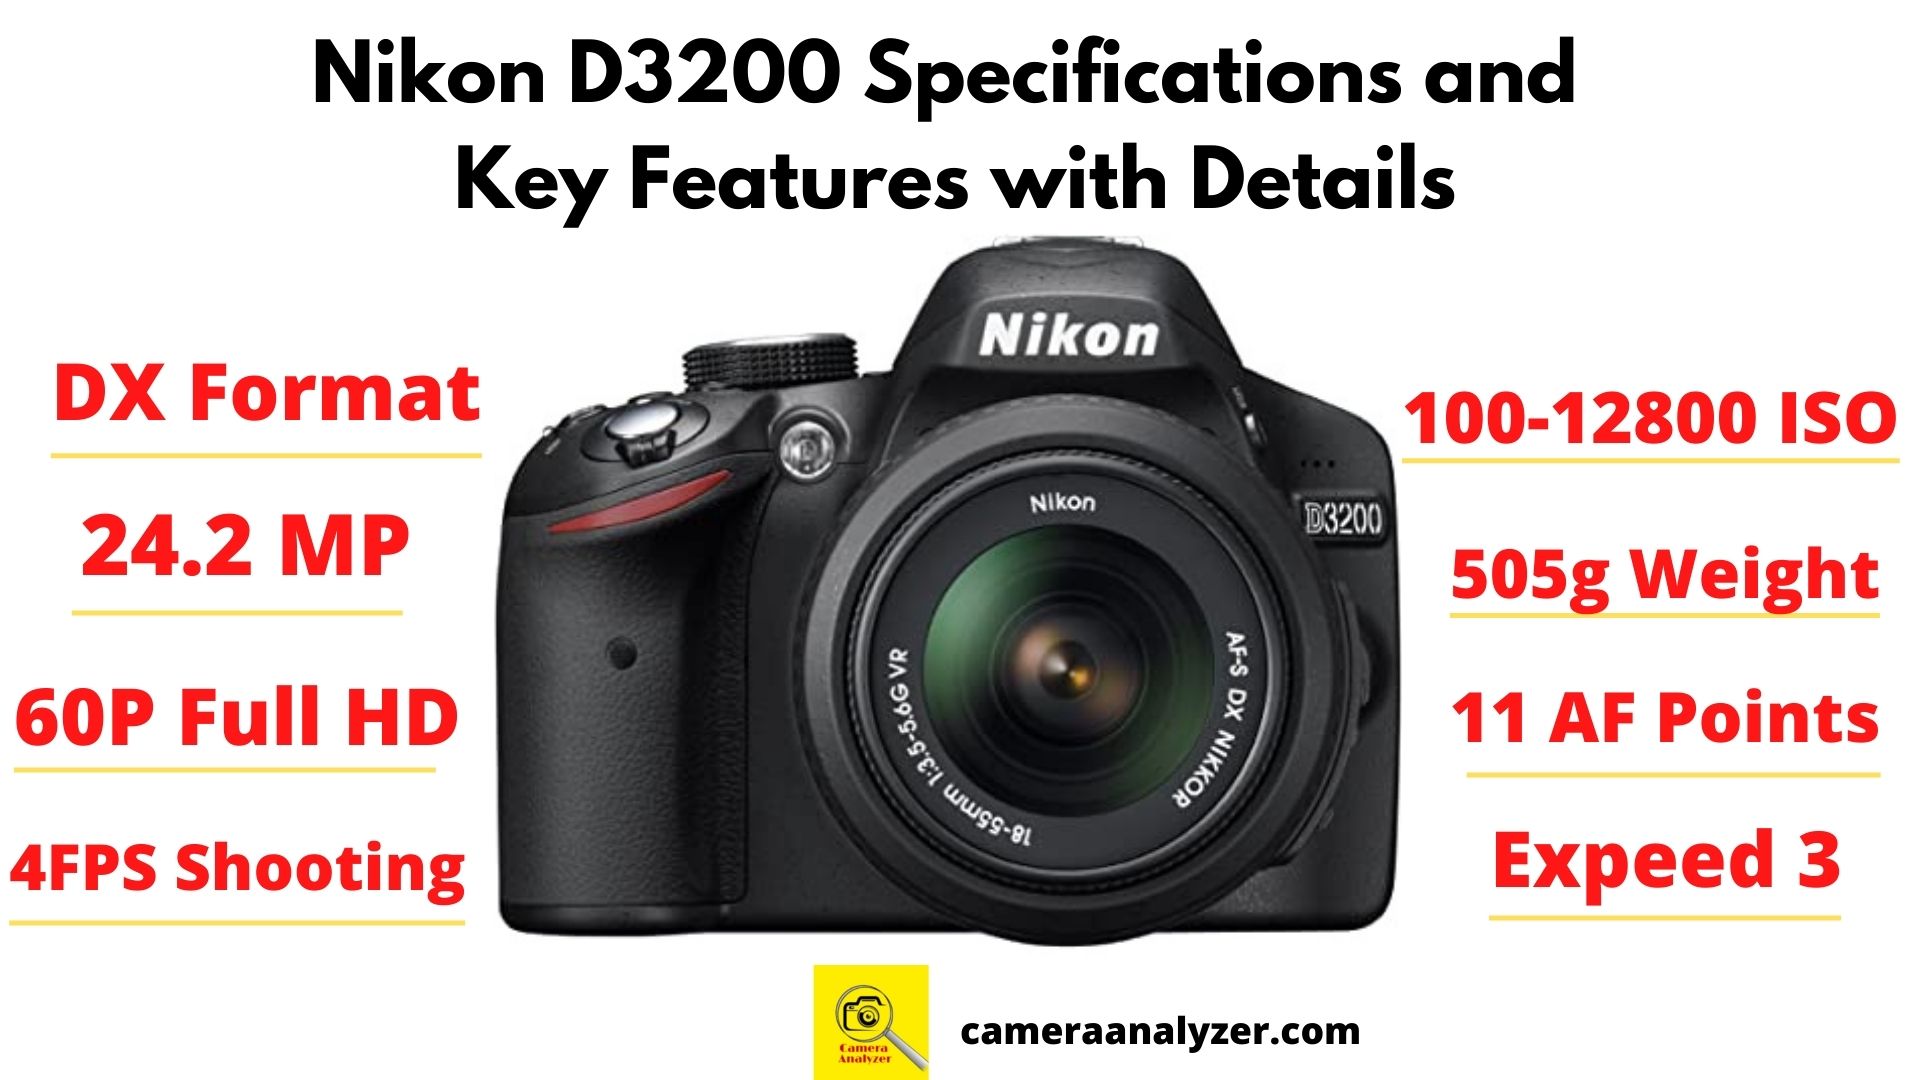 Nikon D3200 Specifications and Key Features - Camera analyzer